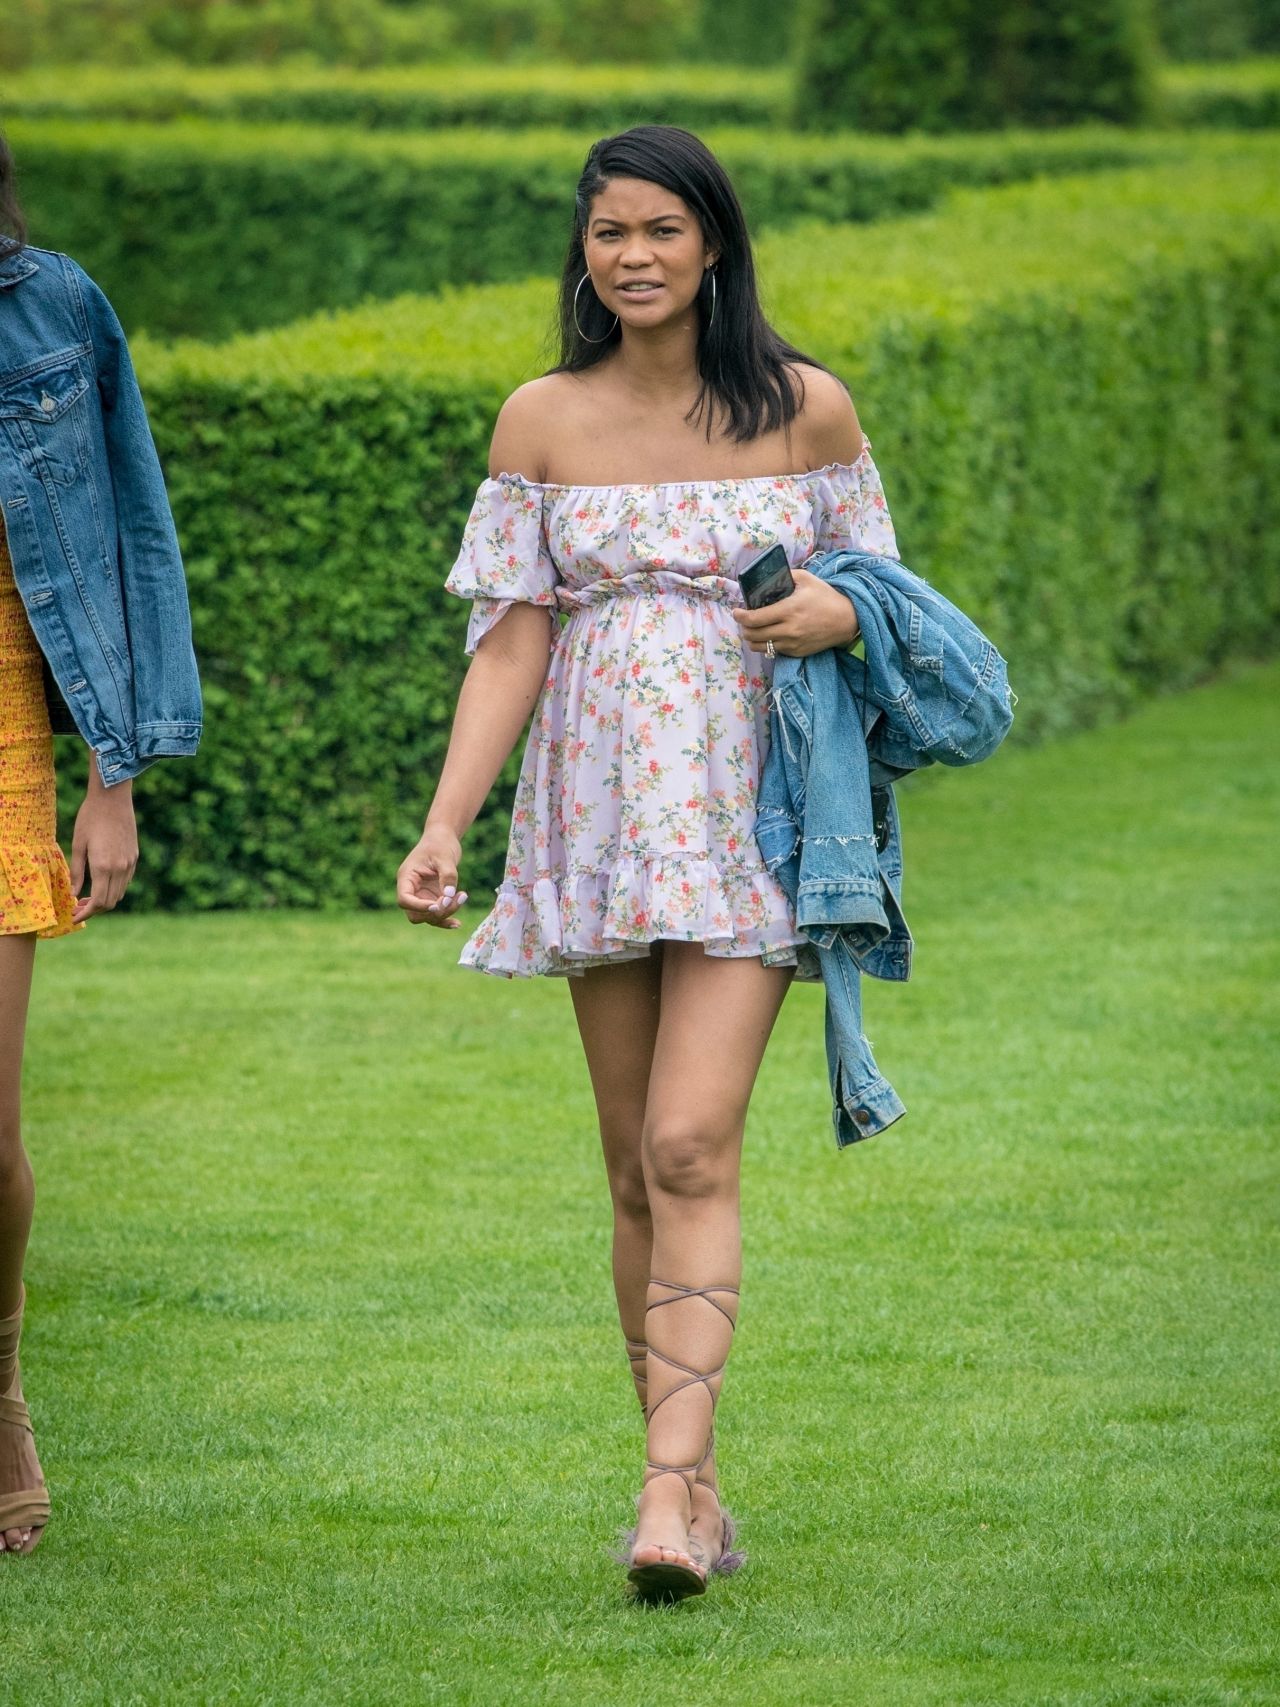 chanel-iman-and-nickayla-rivera-at-a-country-estate-near-windsor-05-30-2018-6.jpg